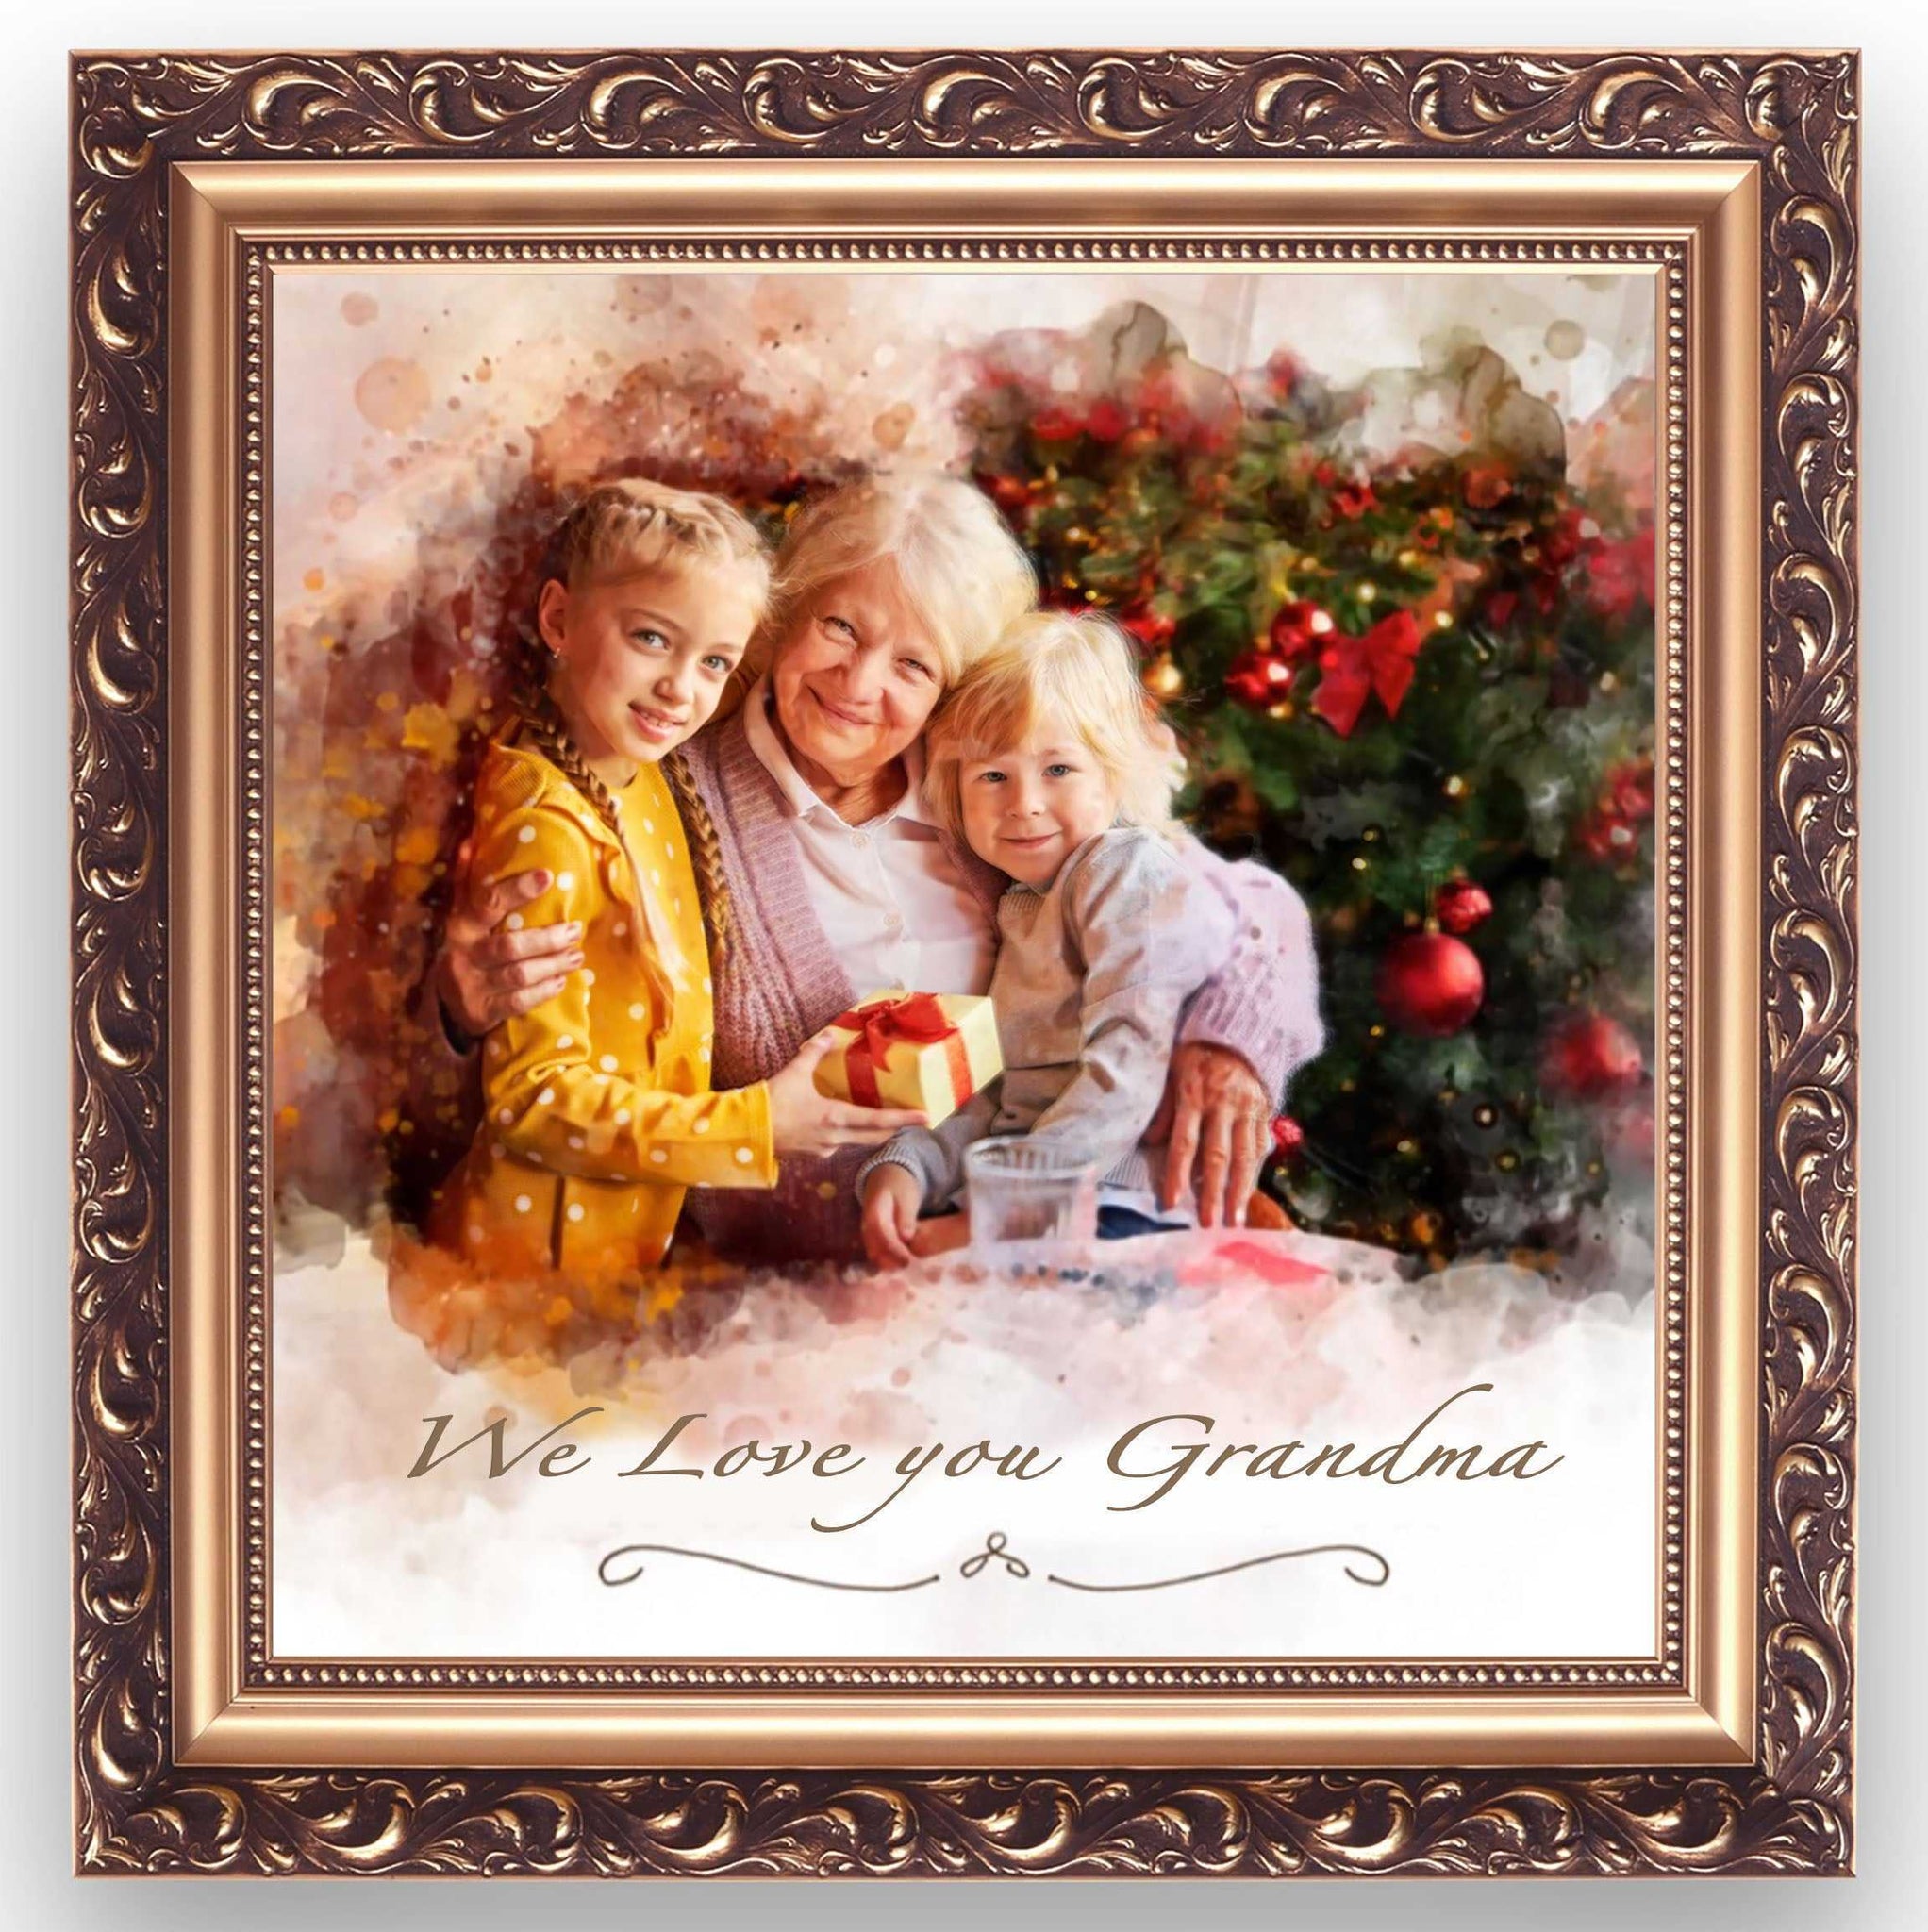 Secret Santa Gifts | Christmas Gift Suggestions | Gifts to Give for Secret Santa - FromPicToArt